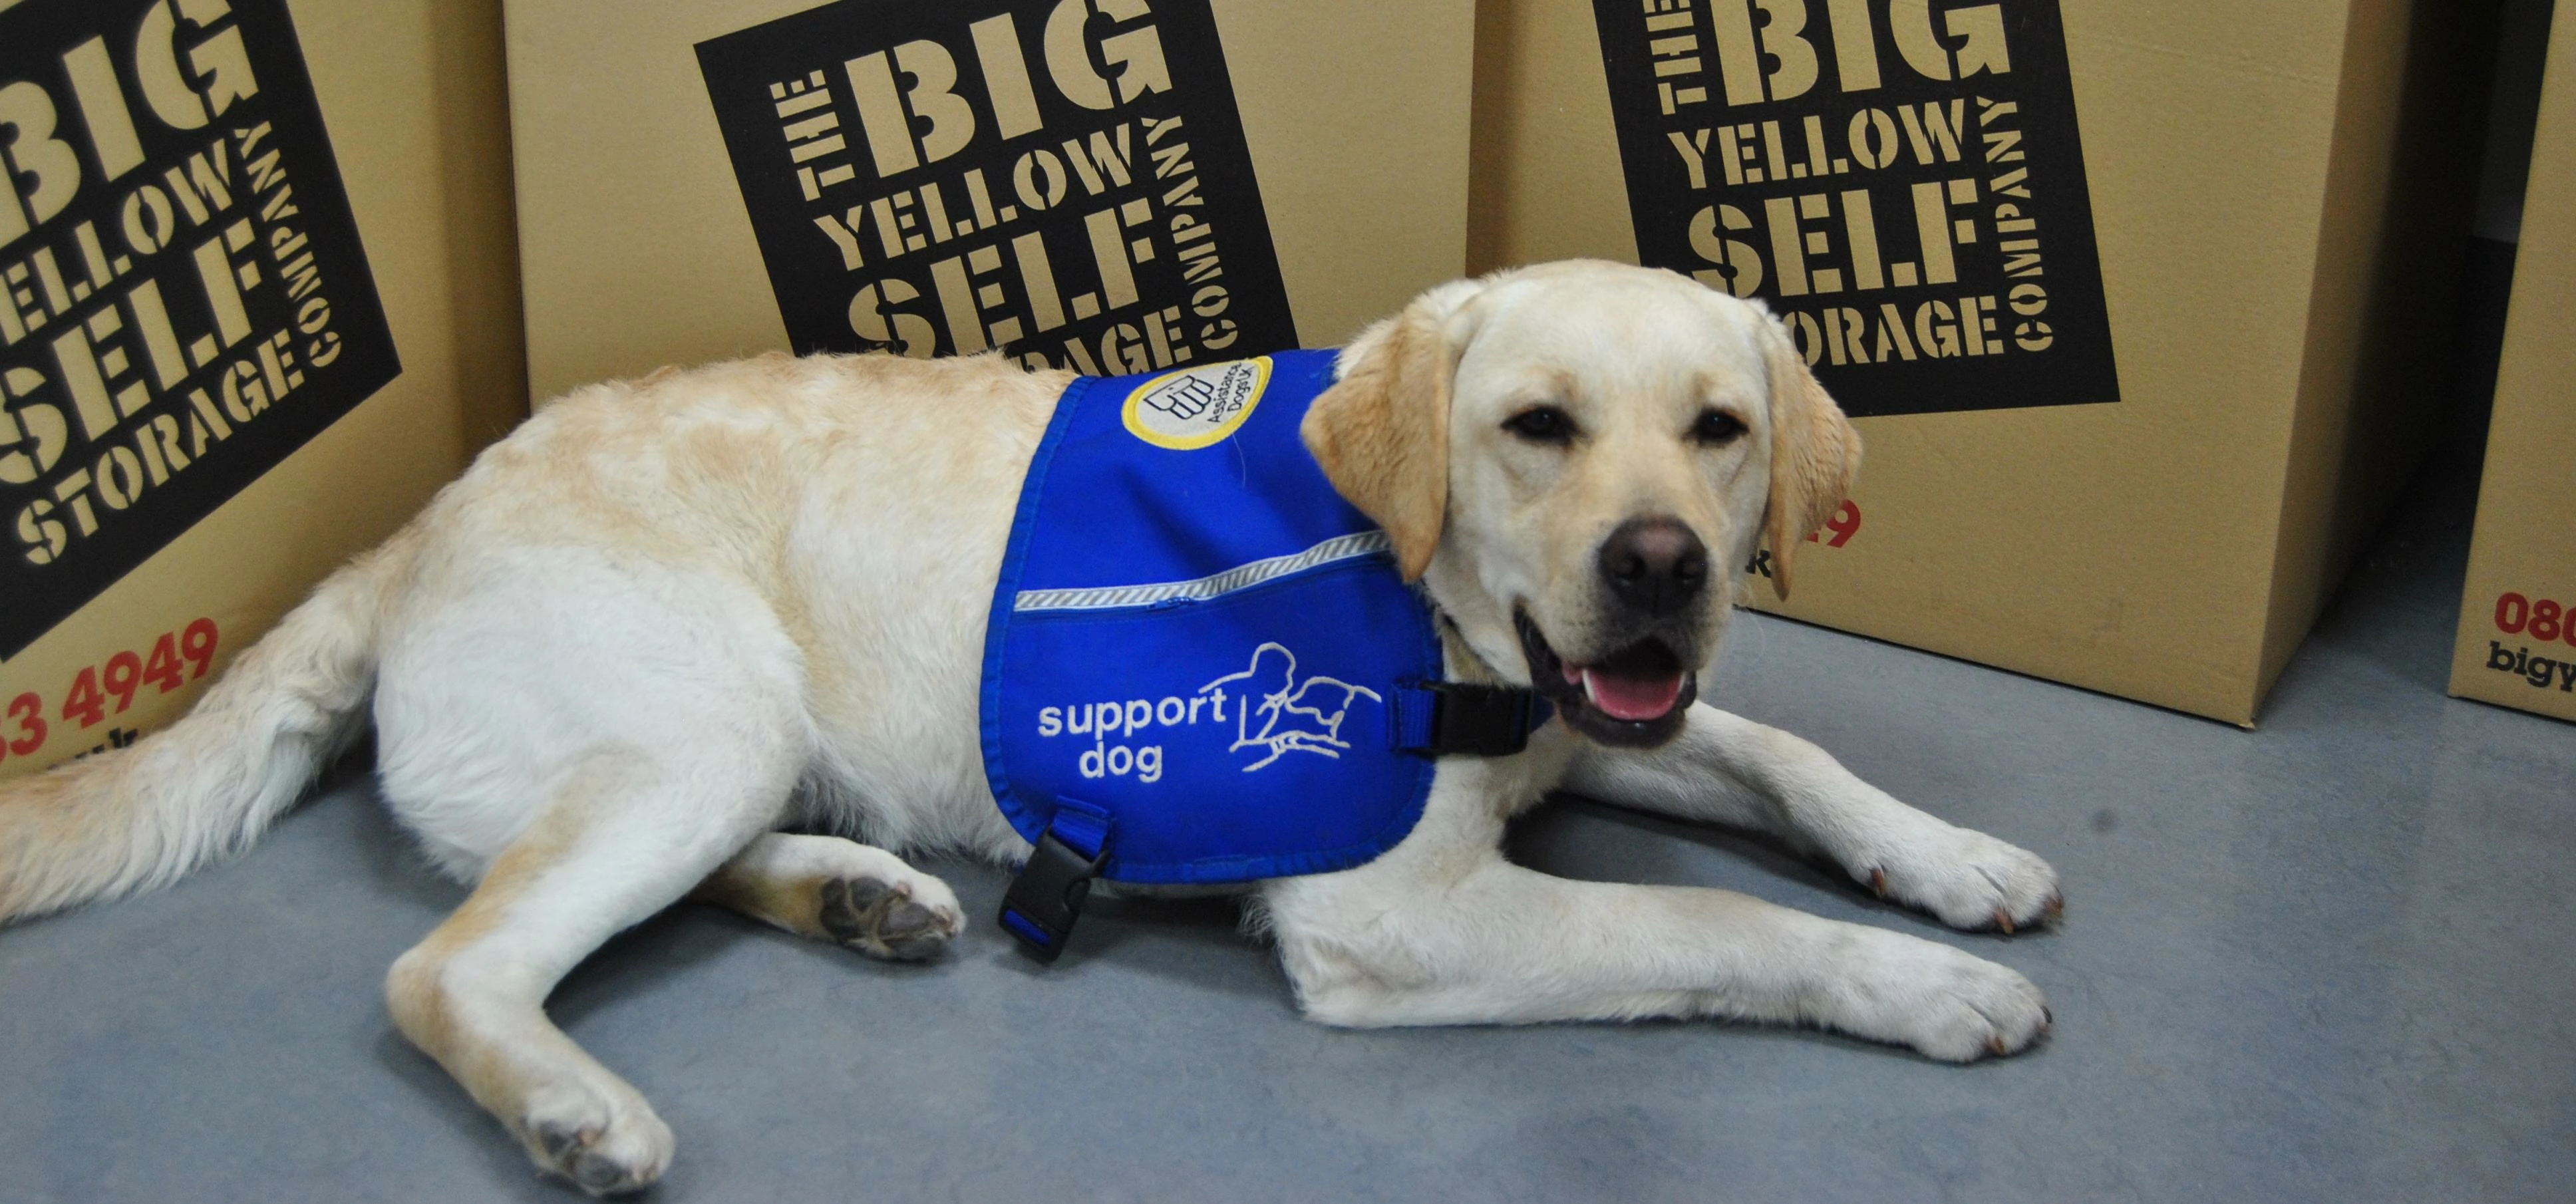 Labradors Ivy and Jazz visited the Big Yellow Hillsborough centre to thank them as part of Assistanc